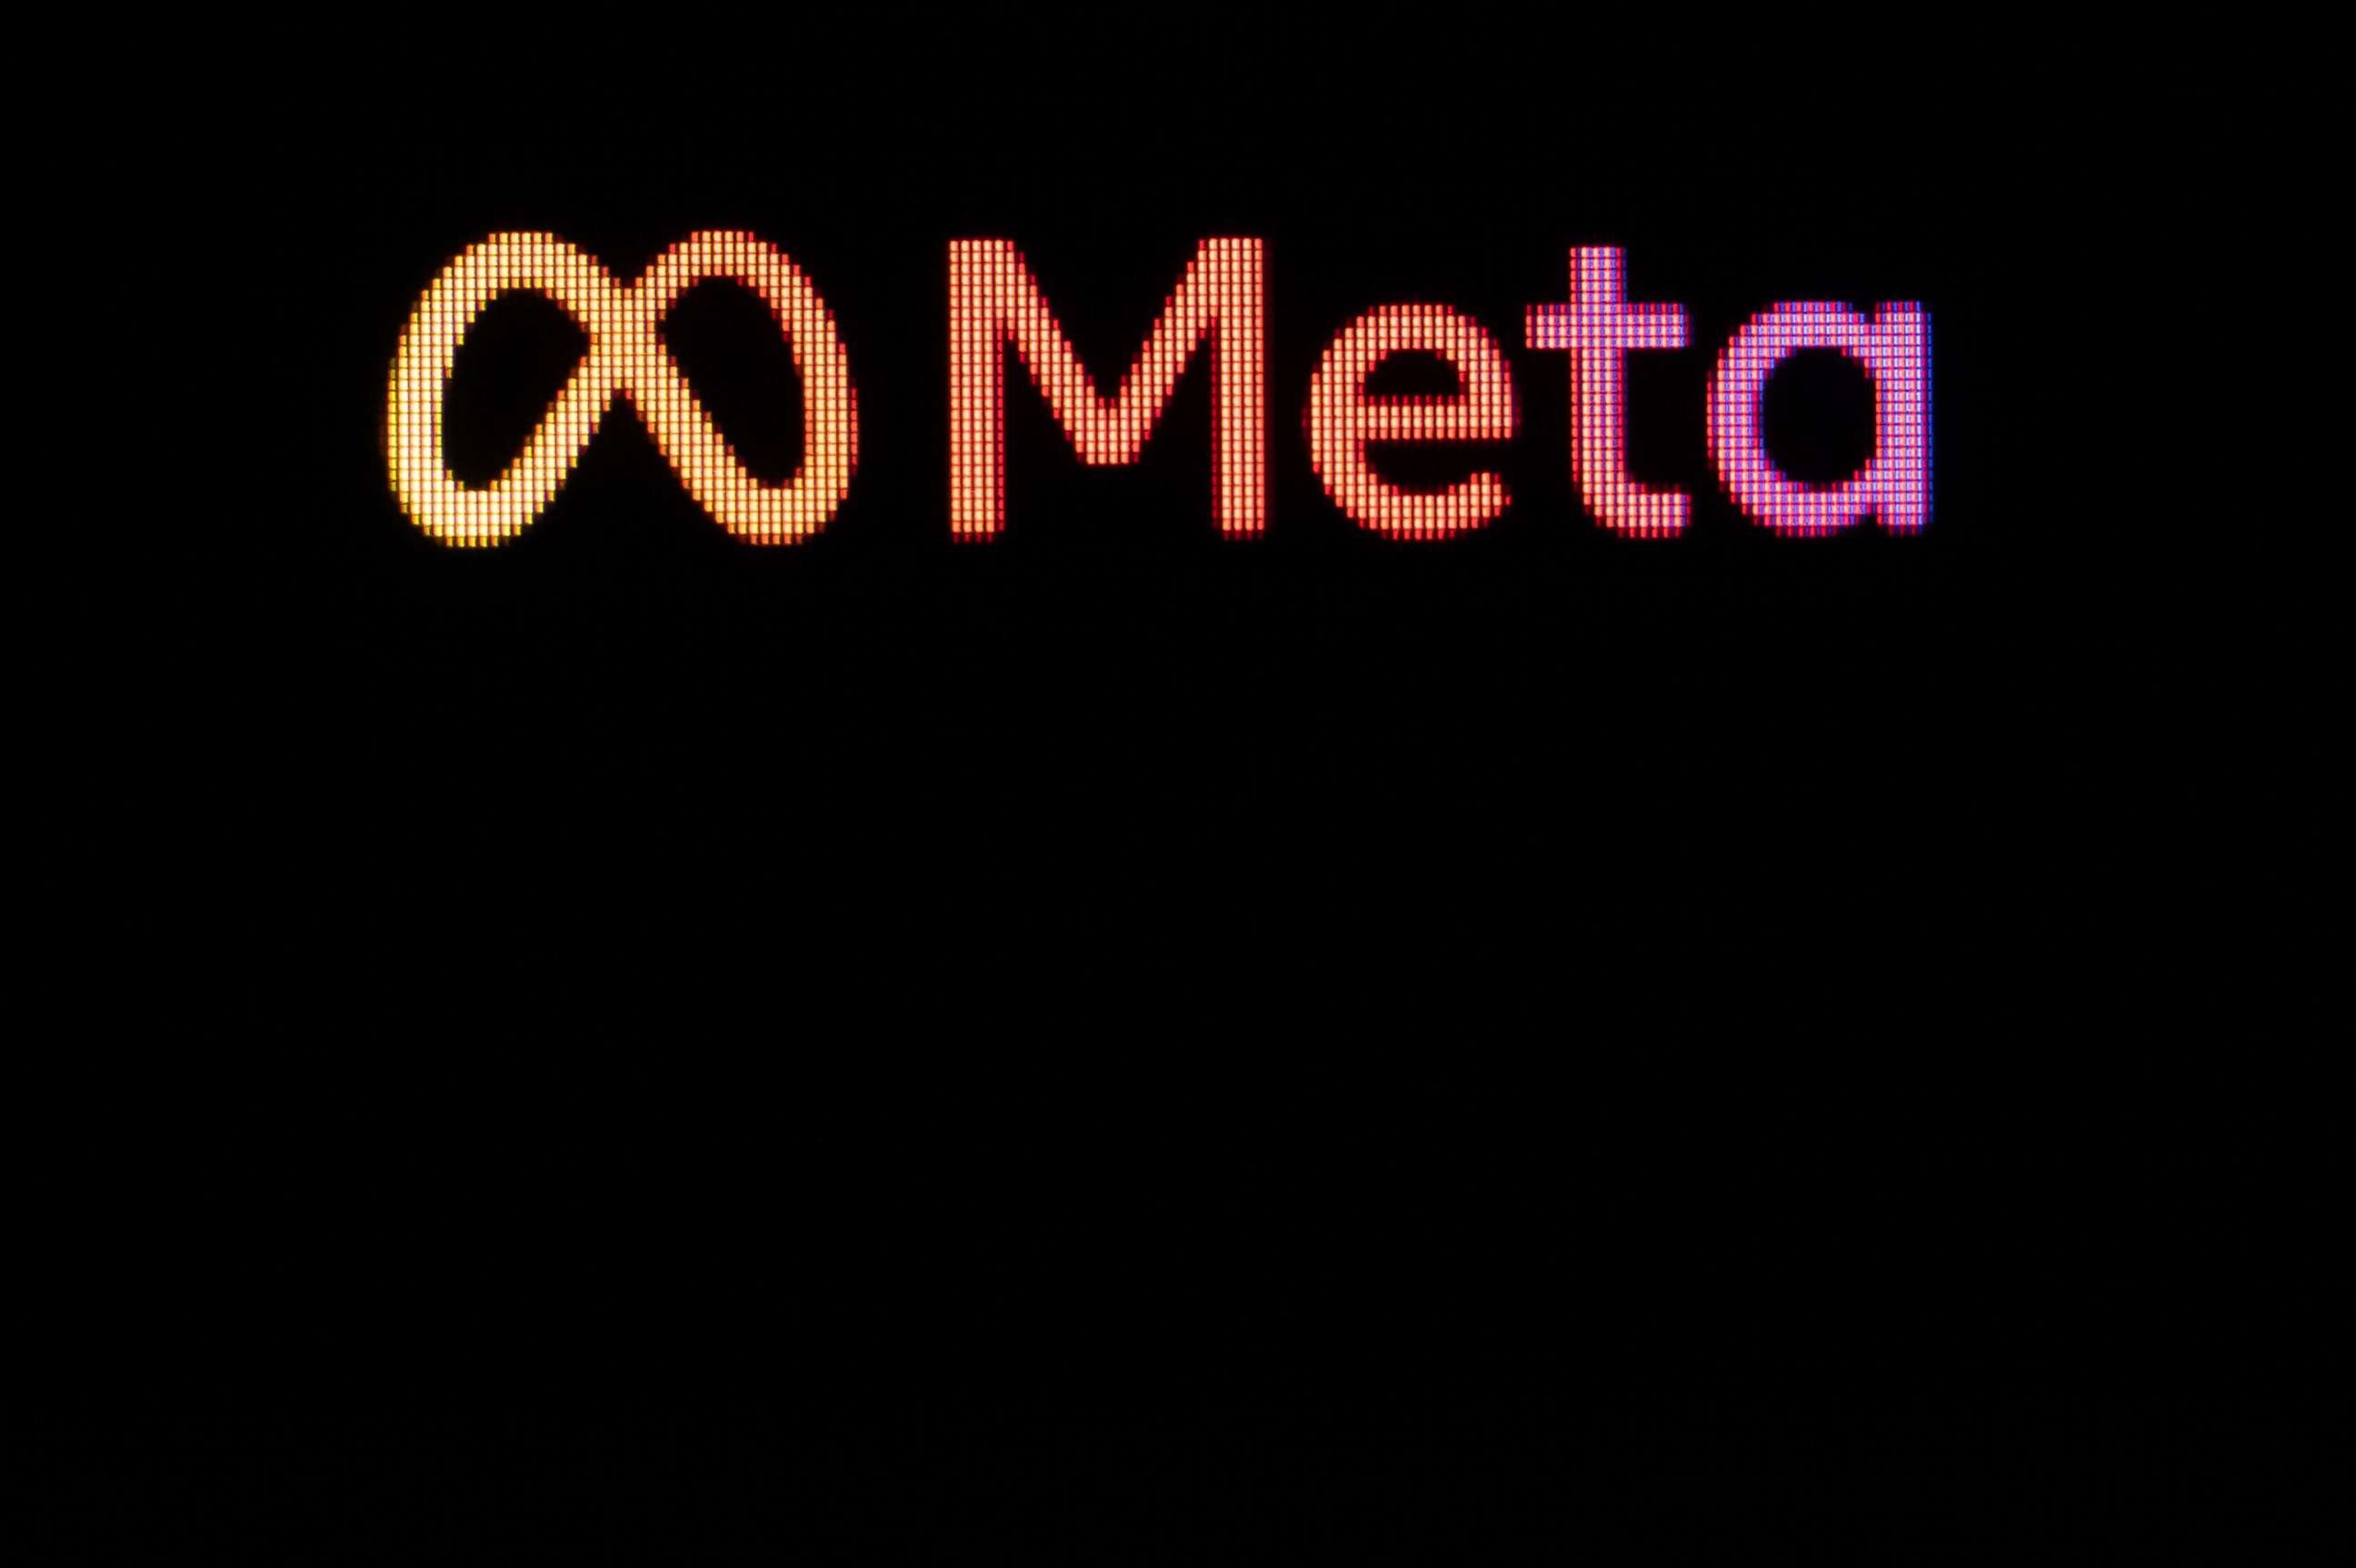 PHOTO: In this Dec. 13, 2021, file photo, the logo of Meta Platforms, Inc. can be seen on the display of an iPhone.